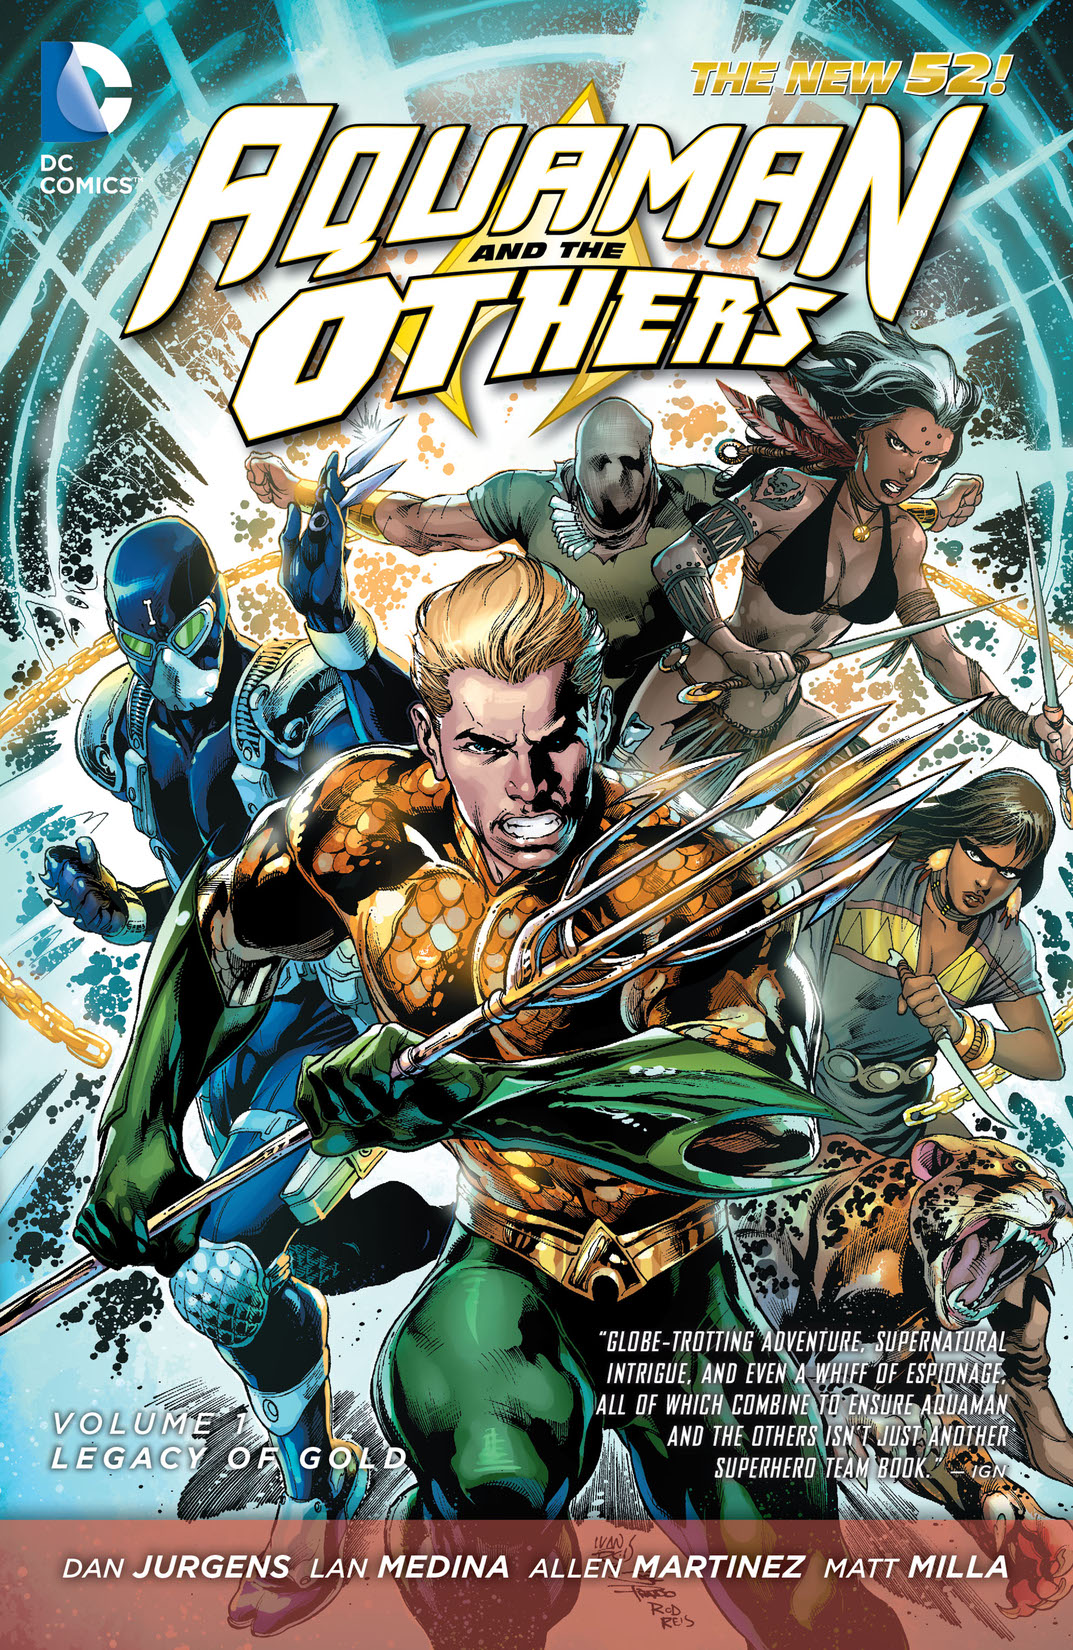 Aquaman and the Others Vol. 1: Legacy of Gold preview images